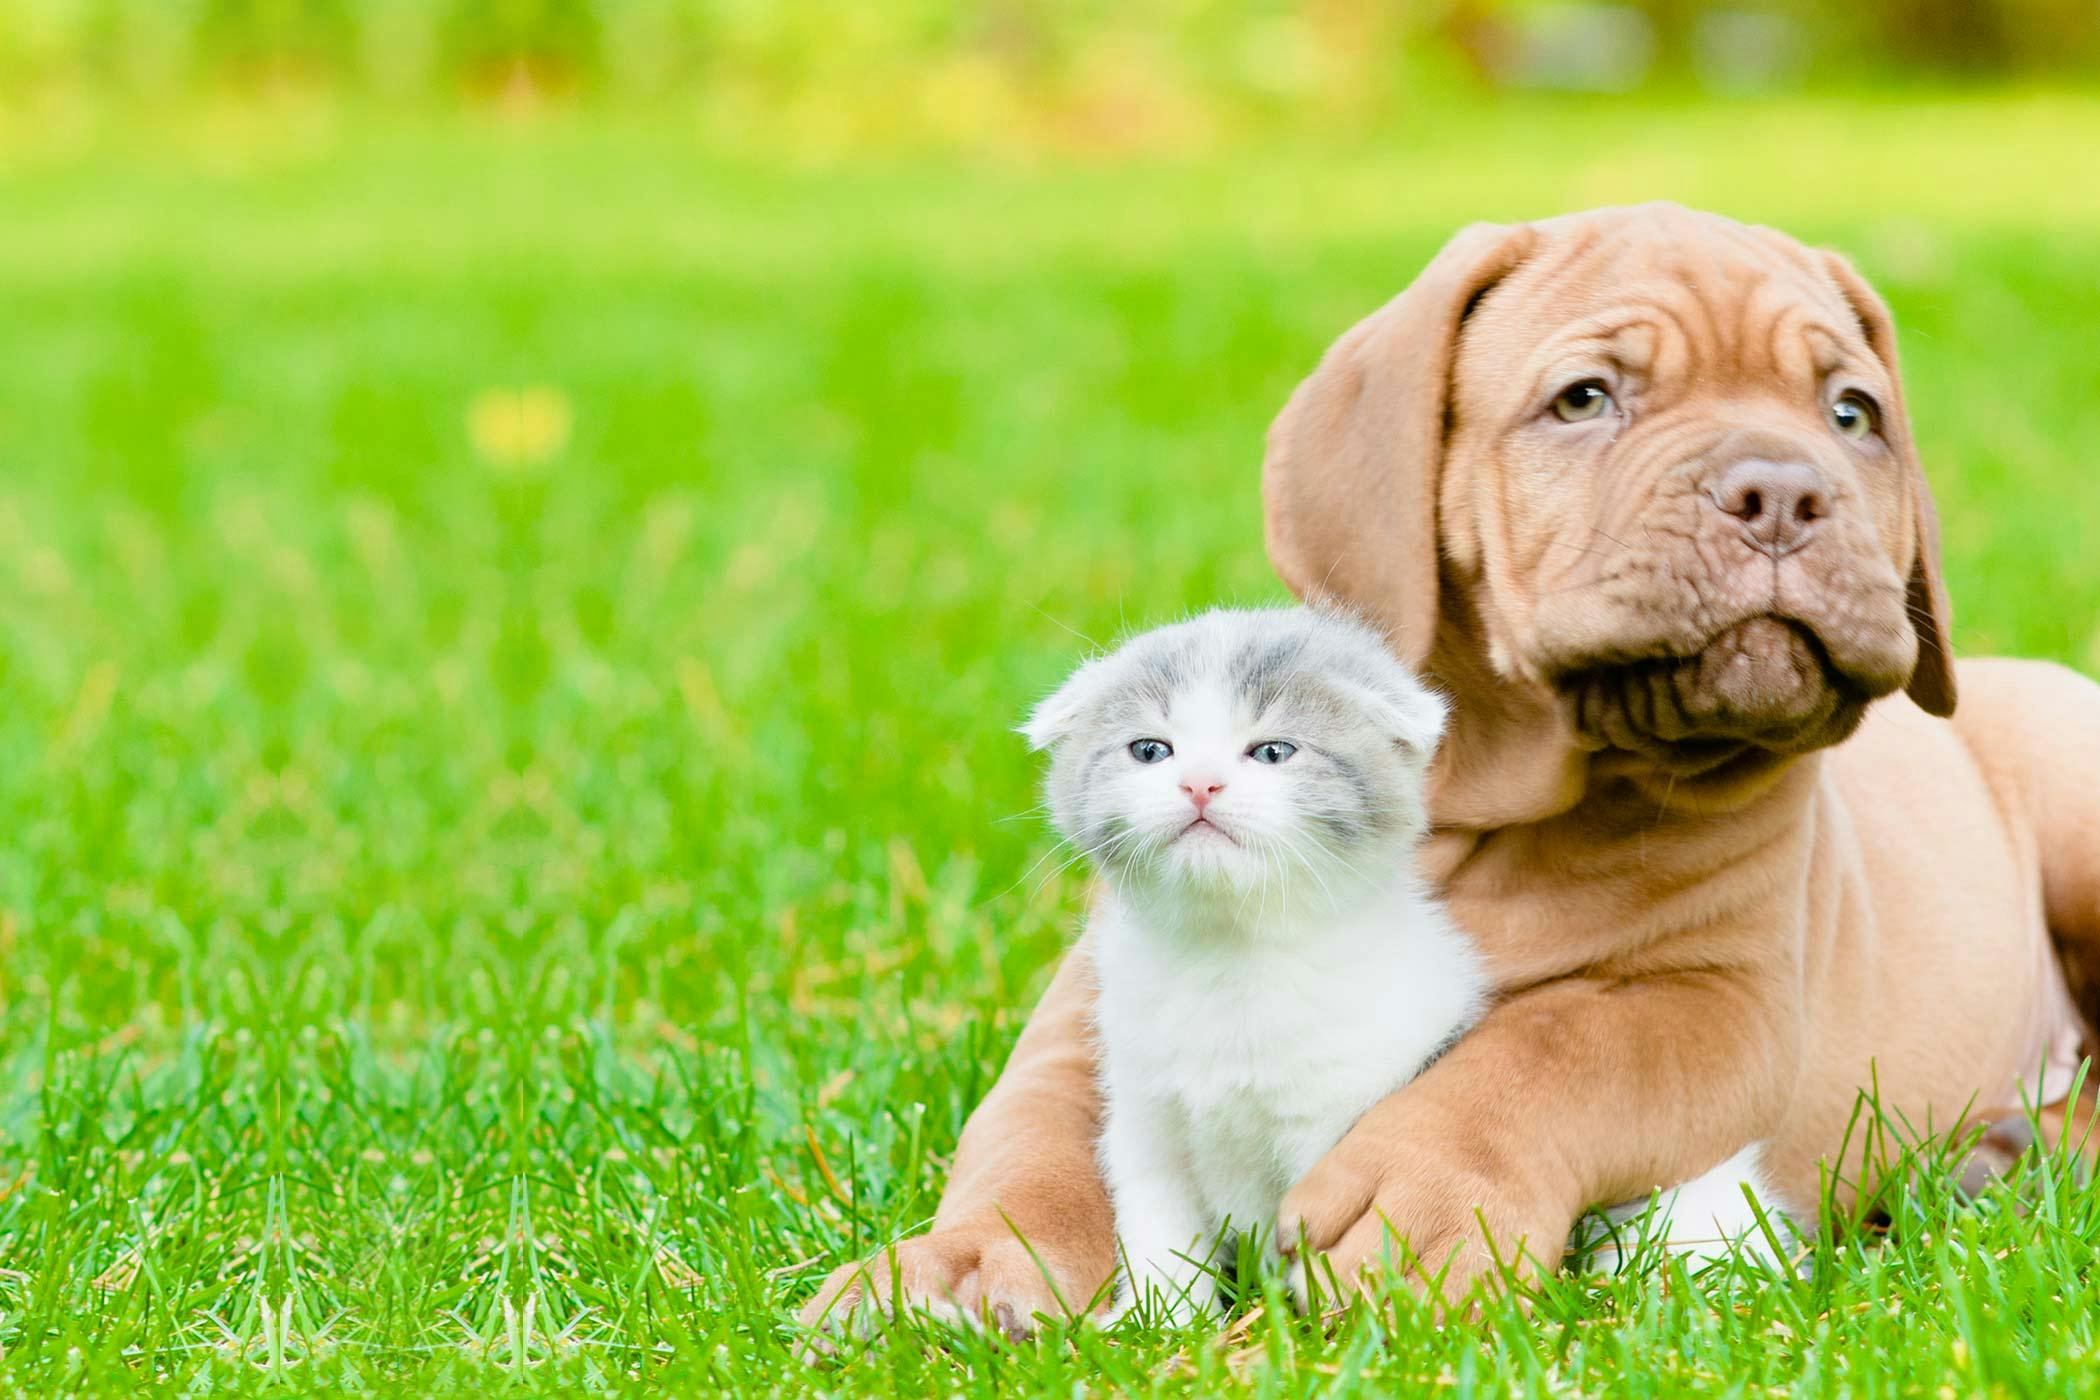 How to Train Your Dog to Accept a Kitten | Wag!